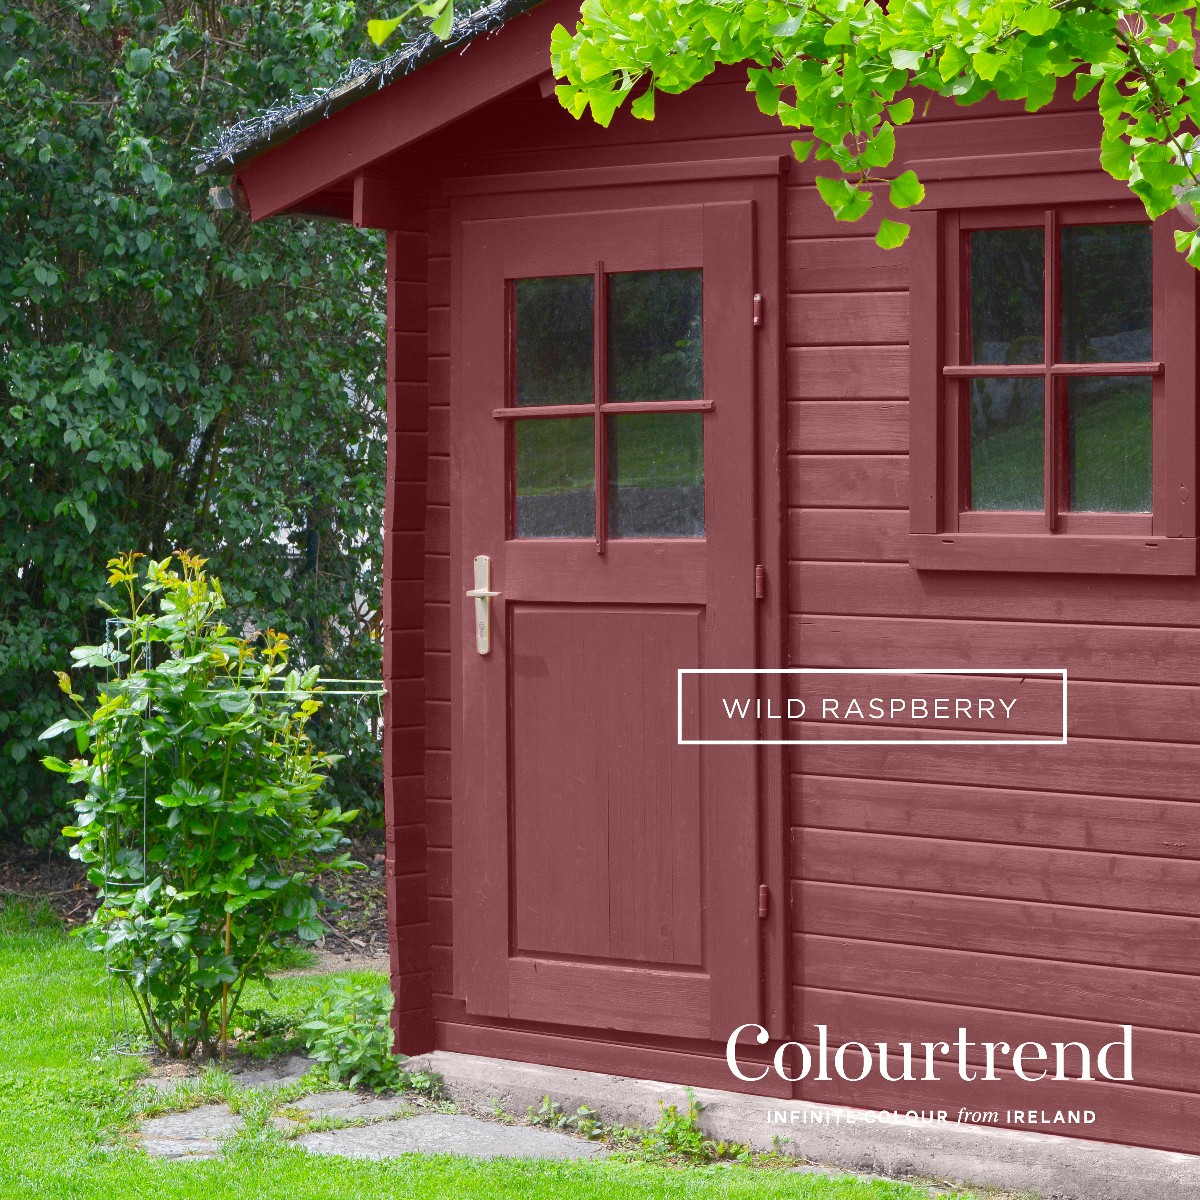 Colourtrend Wild Raspberry on Wooden Shed